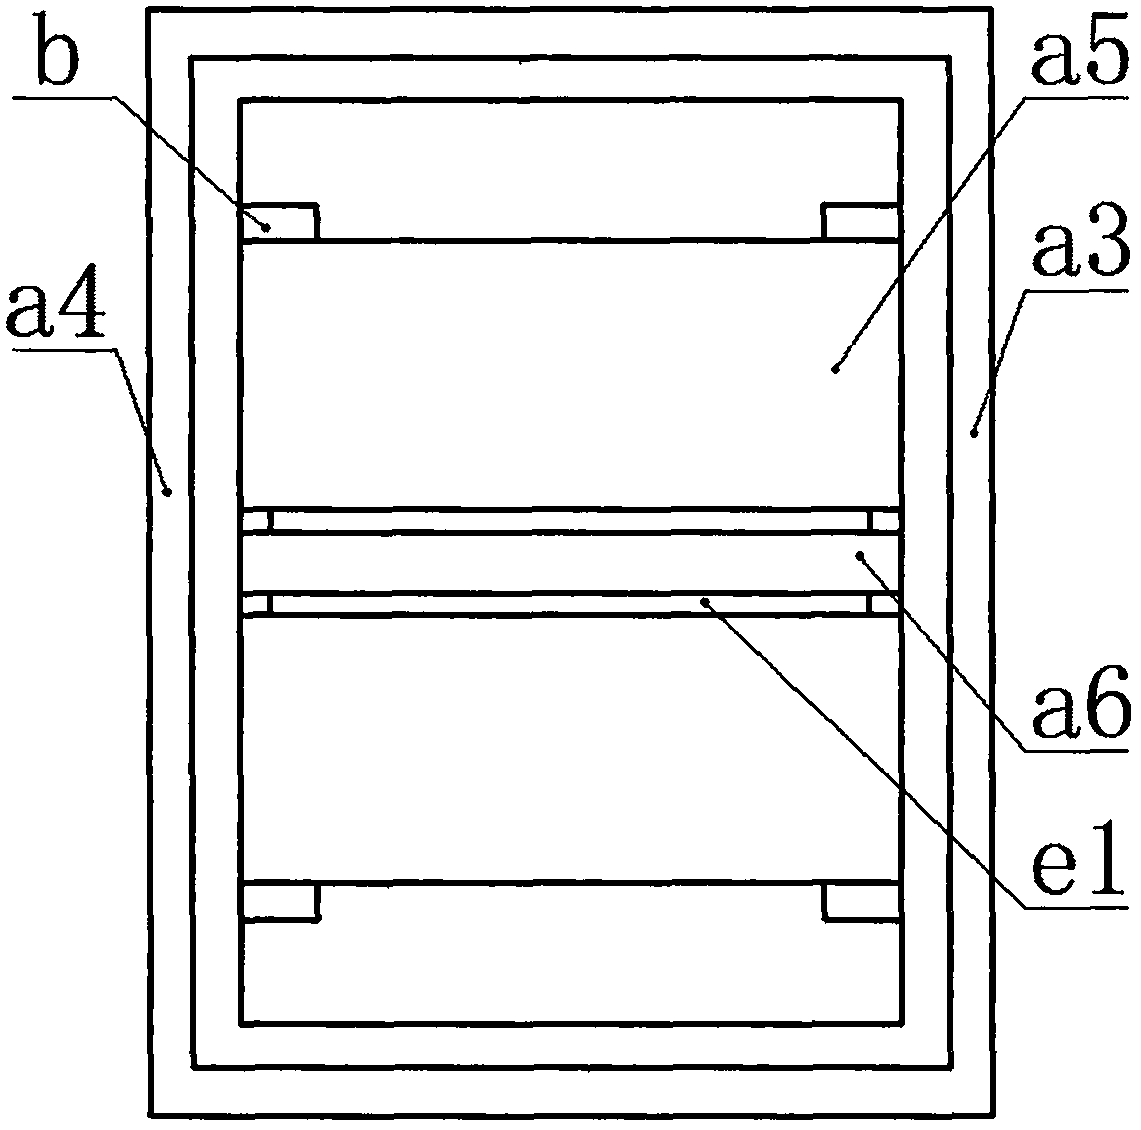 Vibration energy harvester induced by driving airflow